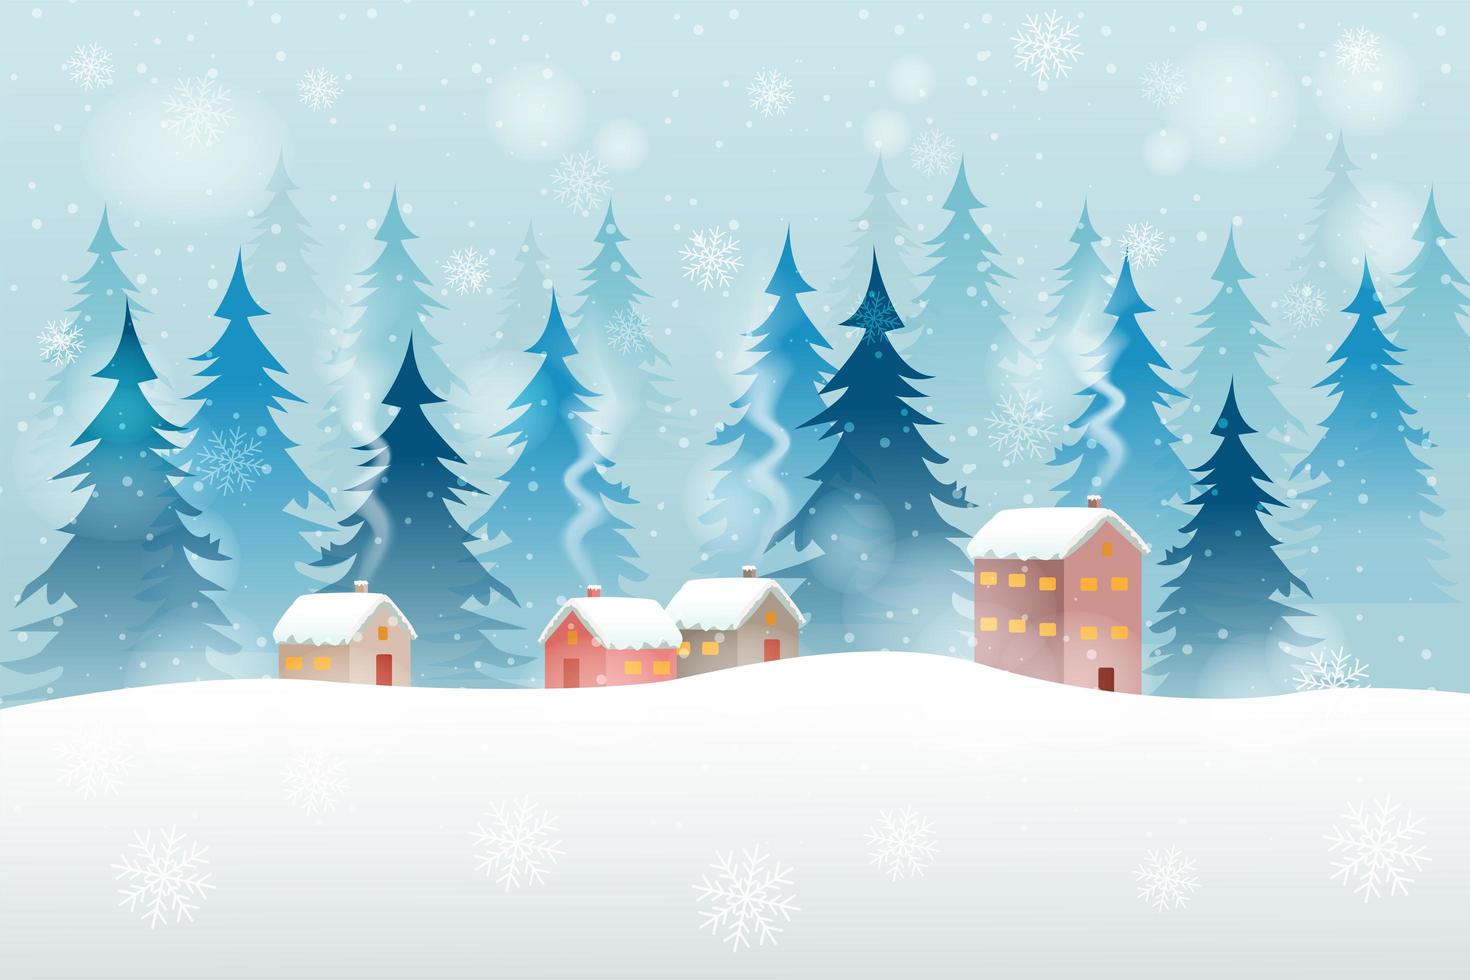 Winter Christmas Landscape with Houses vector